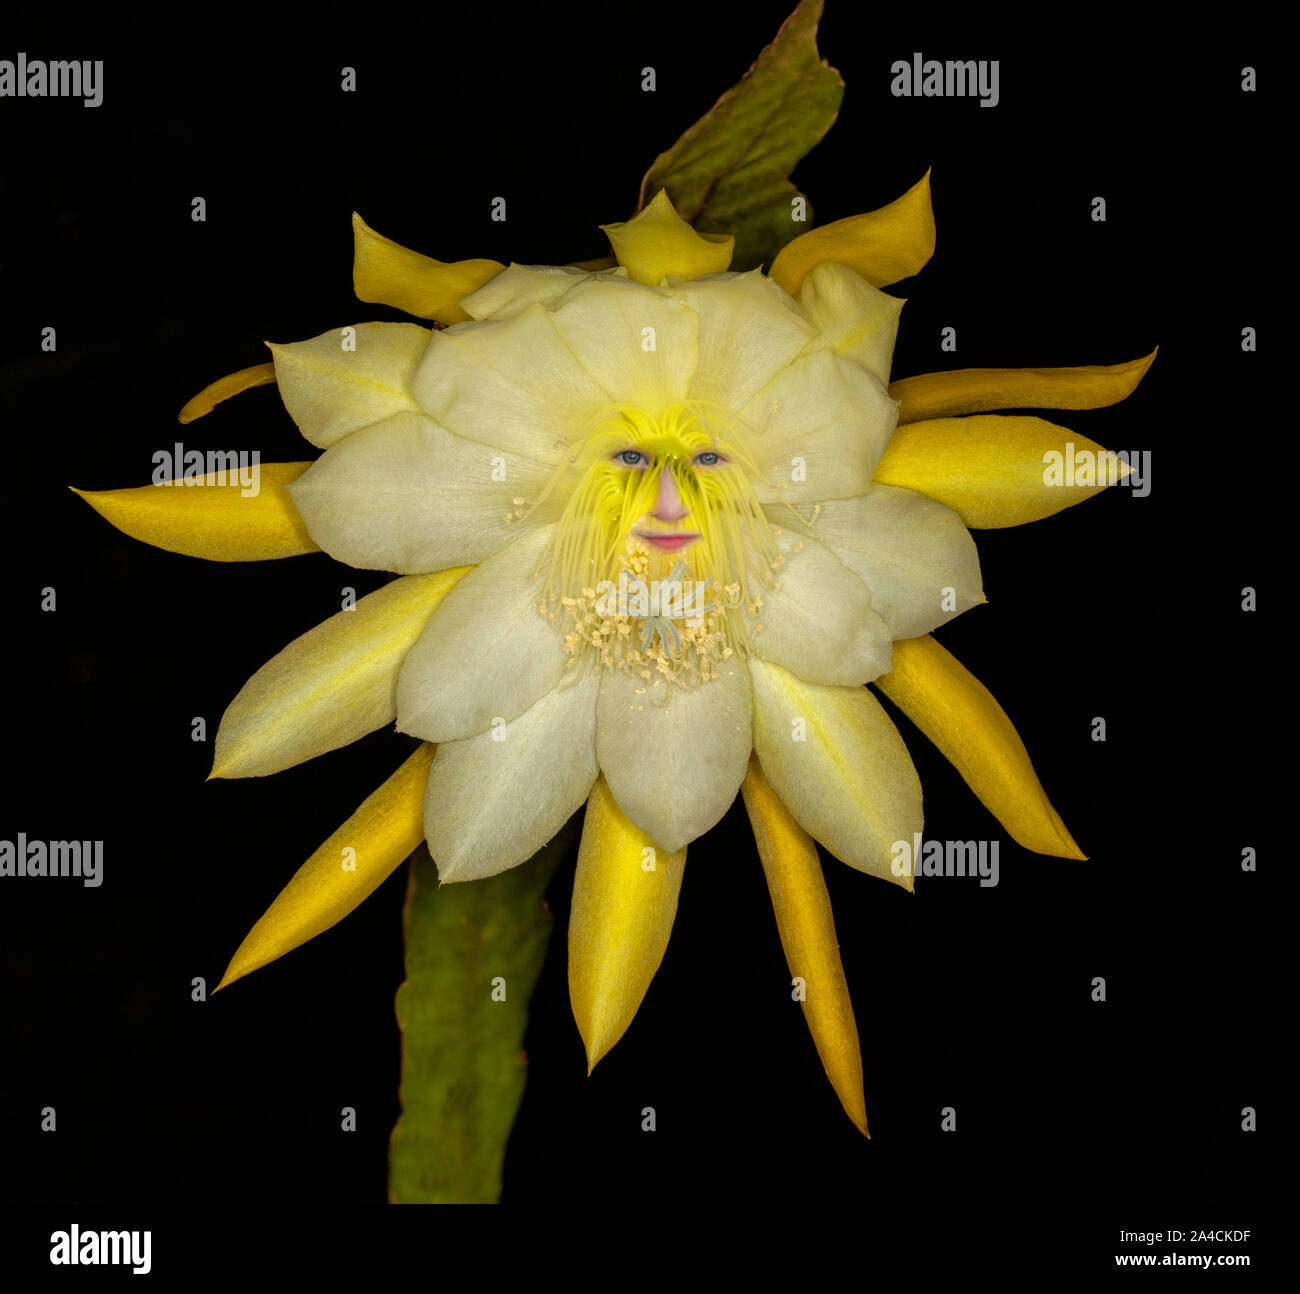 Beautiful yellow flower of cactus plant, Epiphyllum 'Going Bananas' , against black background with face of garden spirit peering from among petals Stock Photo